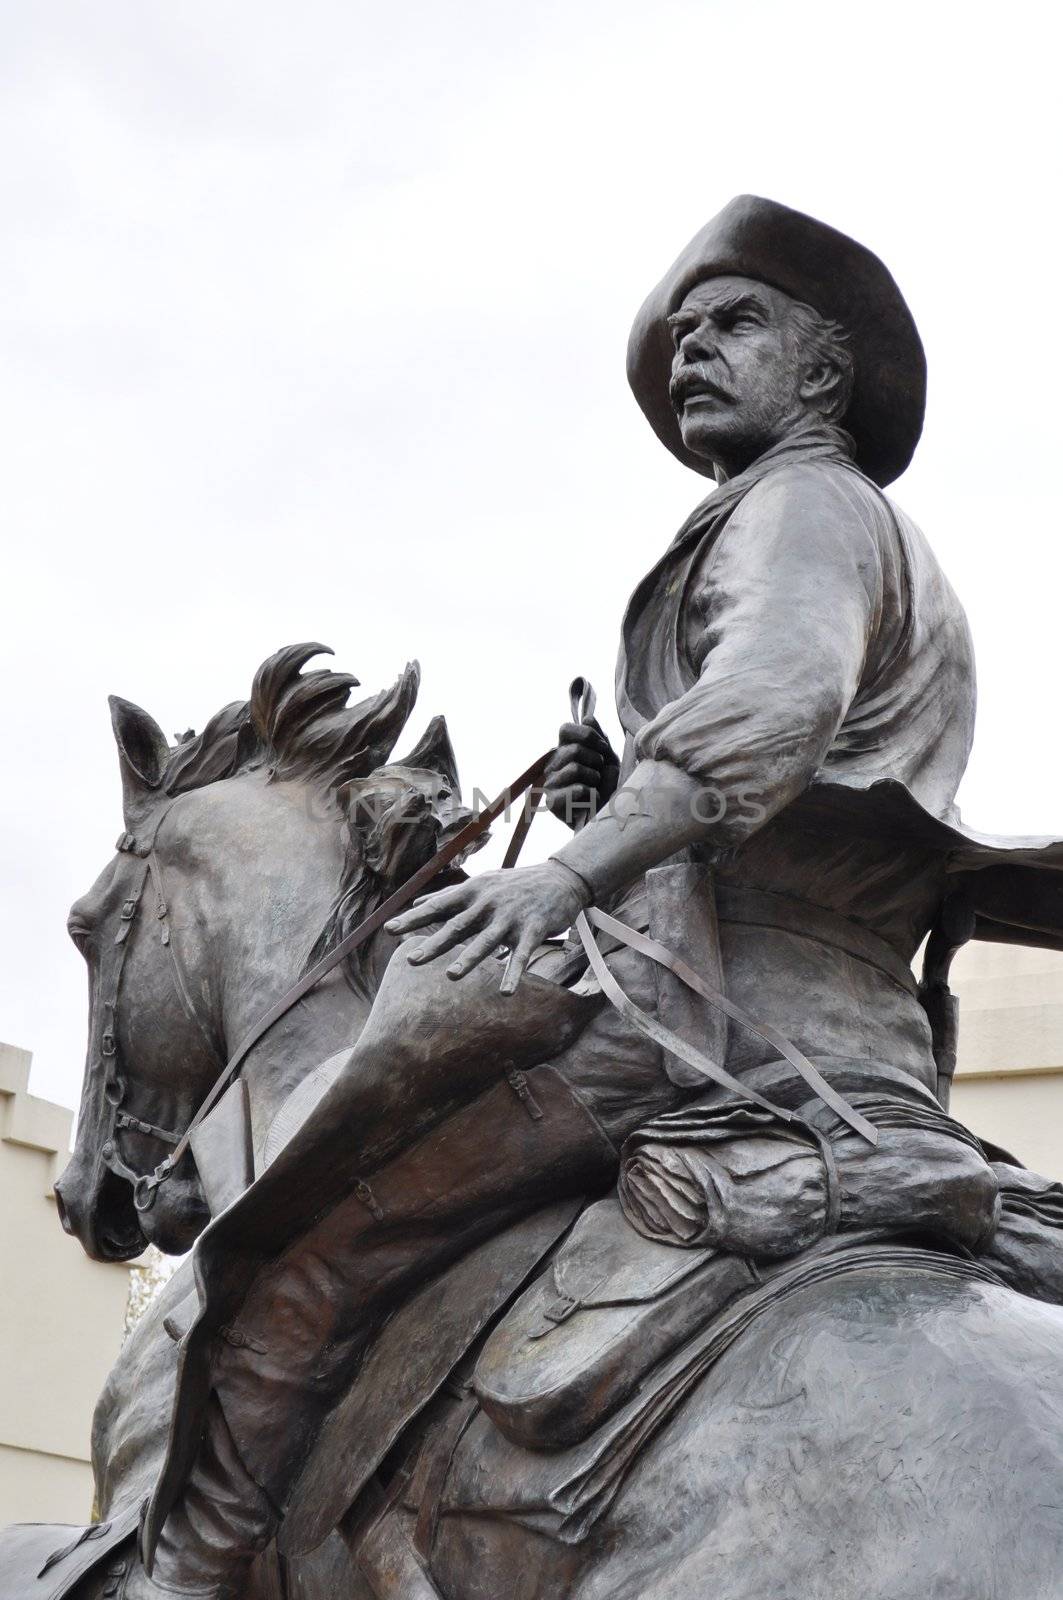 Waco statue man on horse by RefocusPhoto